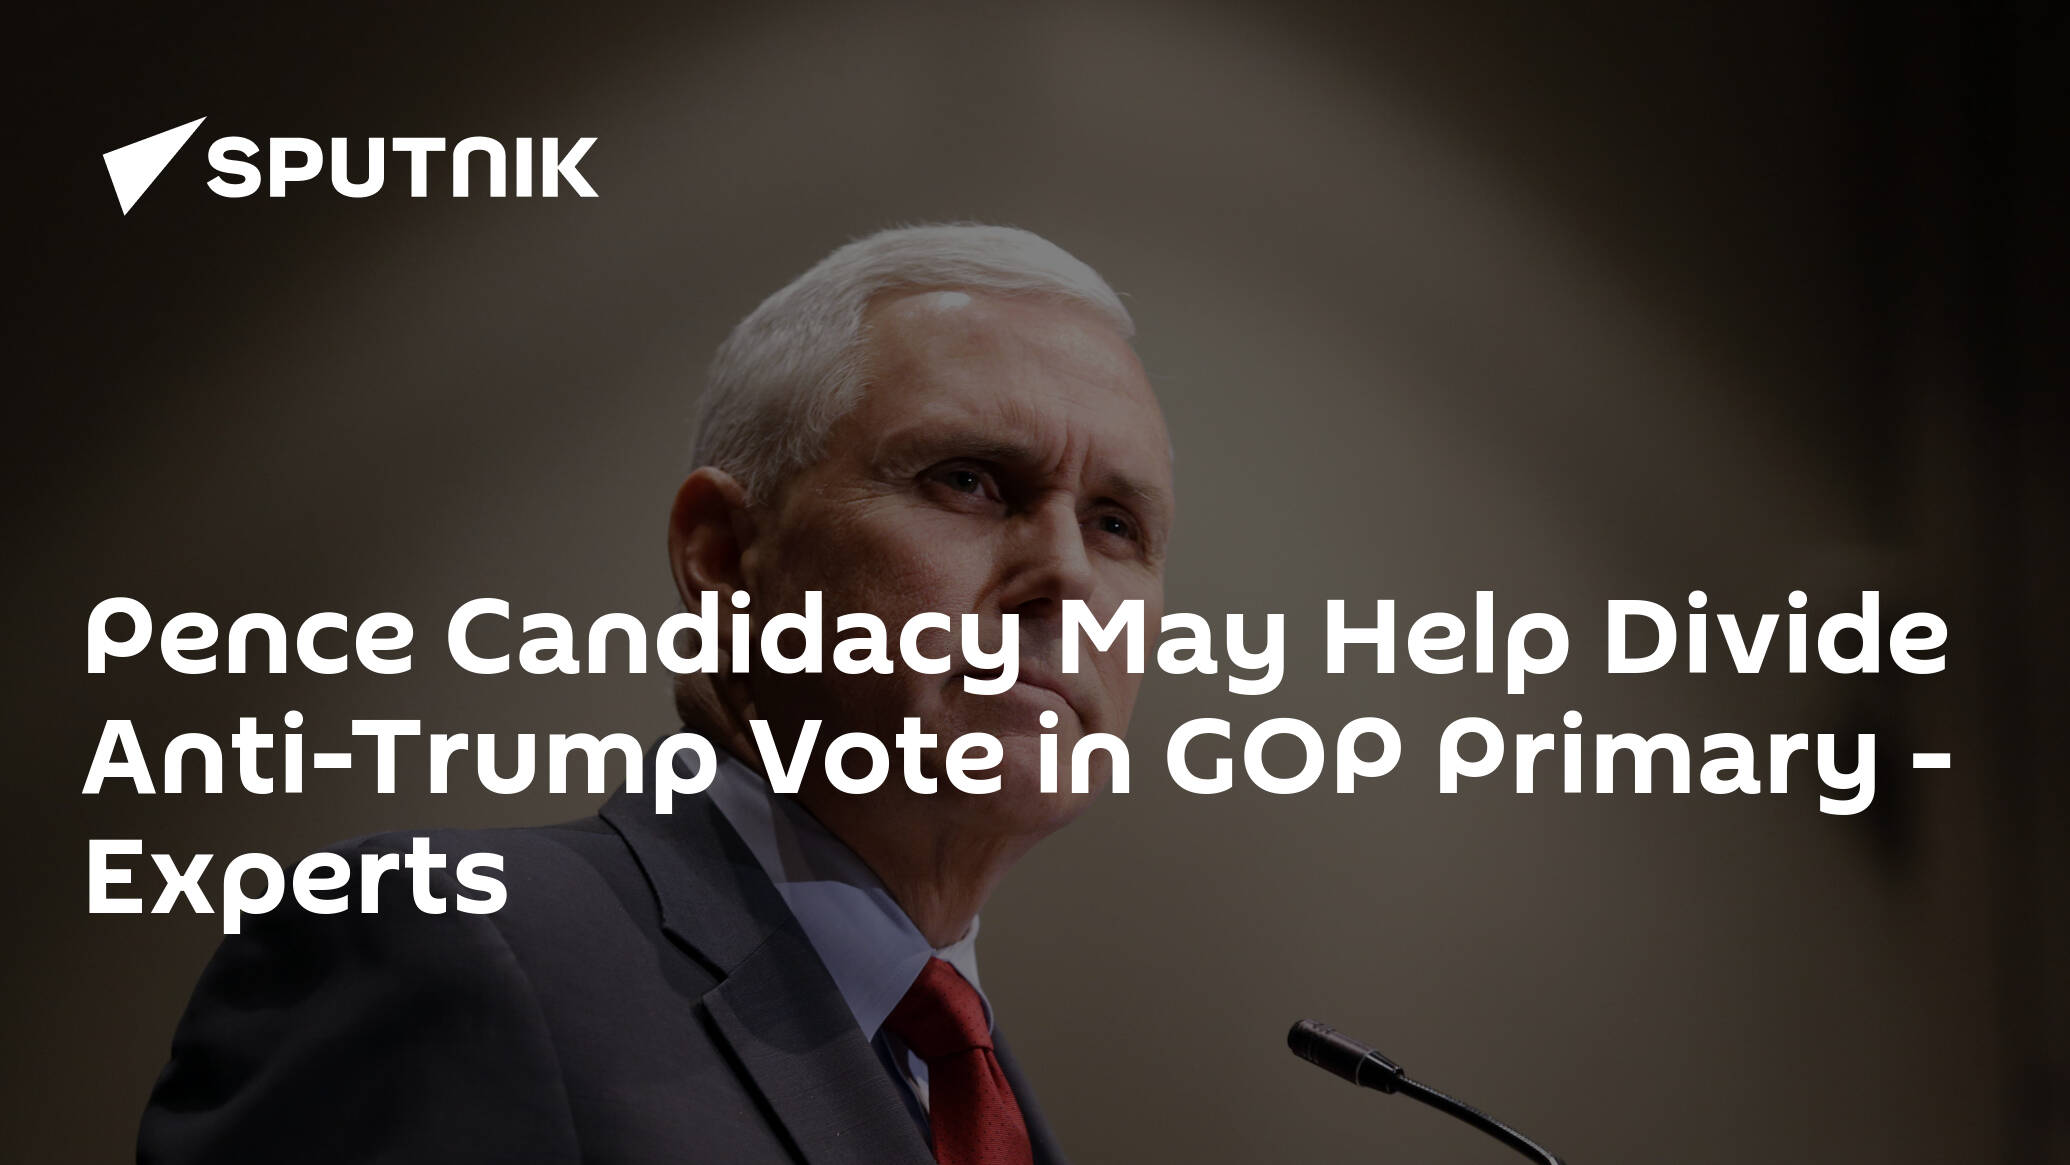 Pence Candidacy May Help Divide Anti-Trump Vote in GOP Primary – Experts